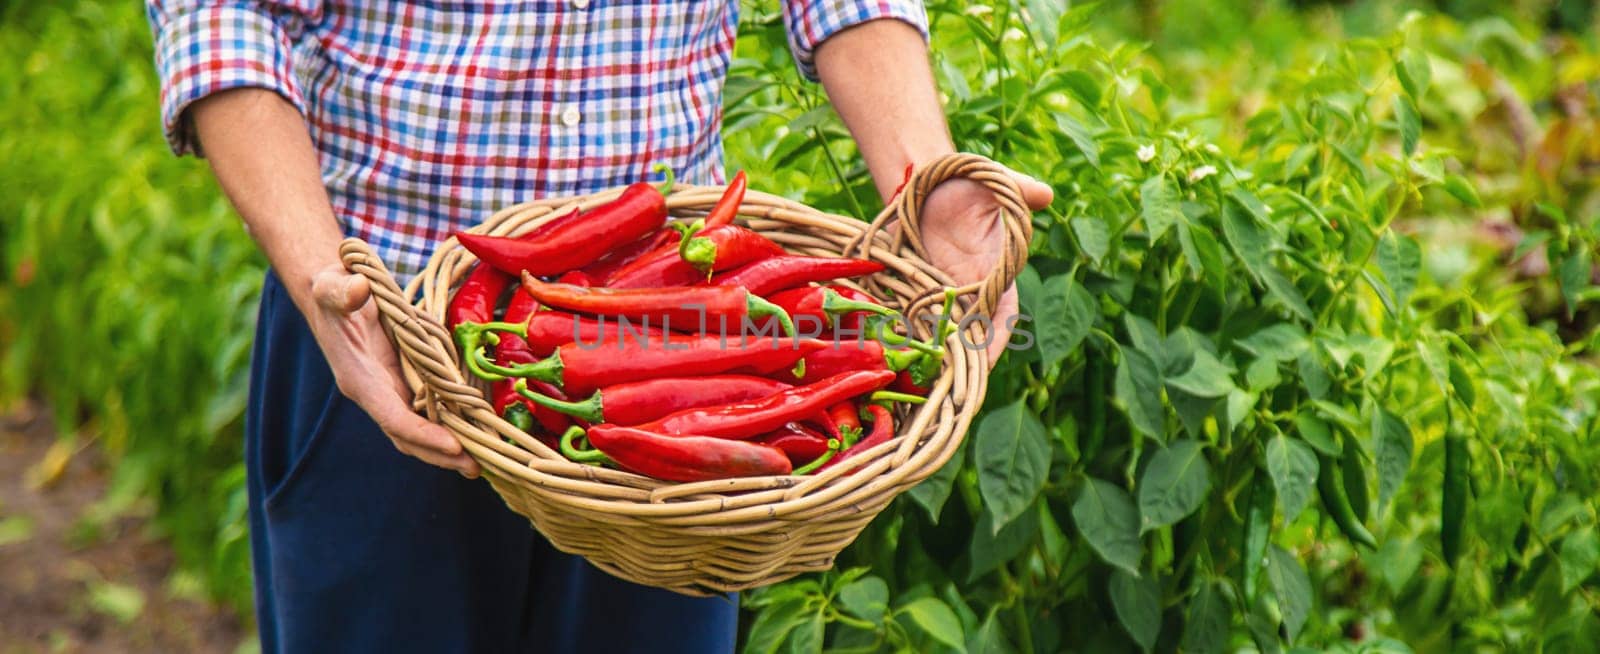 Farmer harvesting chili peppers in garden. Selective focus. Food.